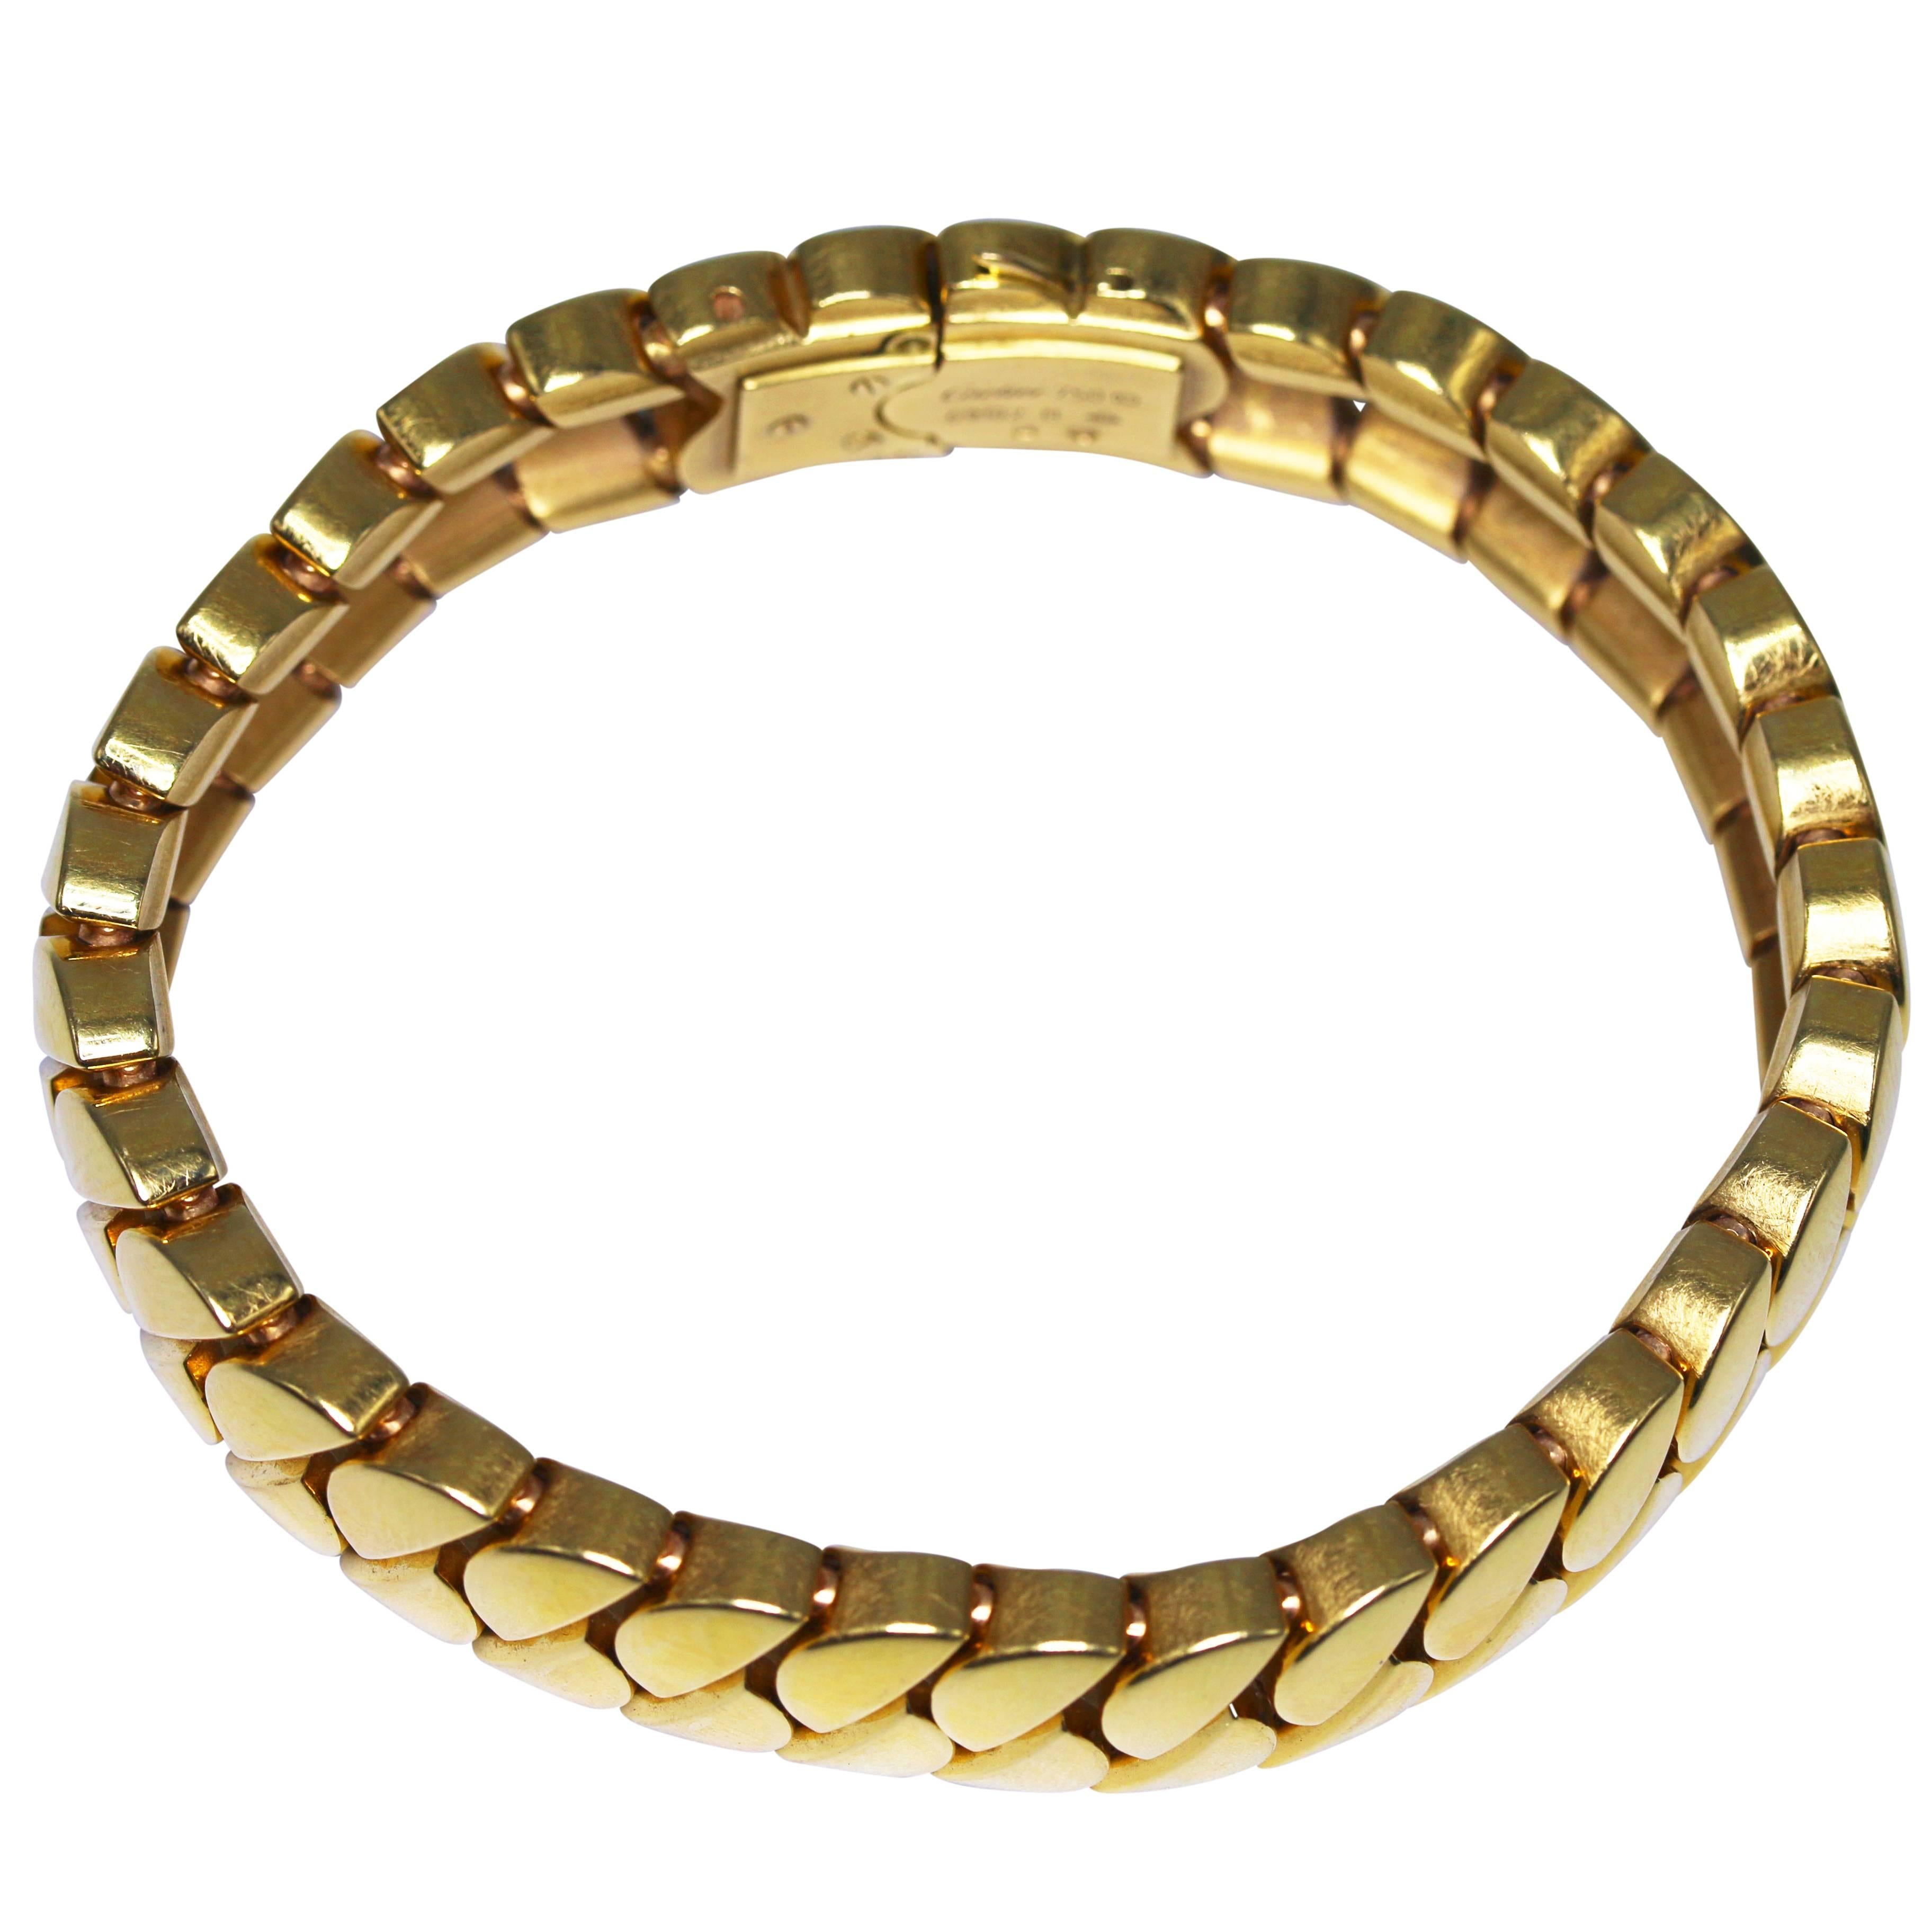 A classic 18 karat gold link 'La Dona' bracelet by Cartier, designed as a series of polished gold half moon shaped links in an angled double row, gross weight 106.0 grams, length 7 inches, width 5/8 inch, signed Cartier, numbered 69182 B, with